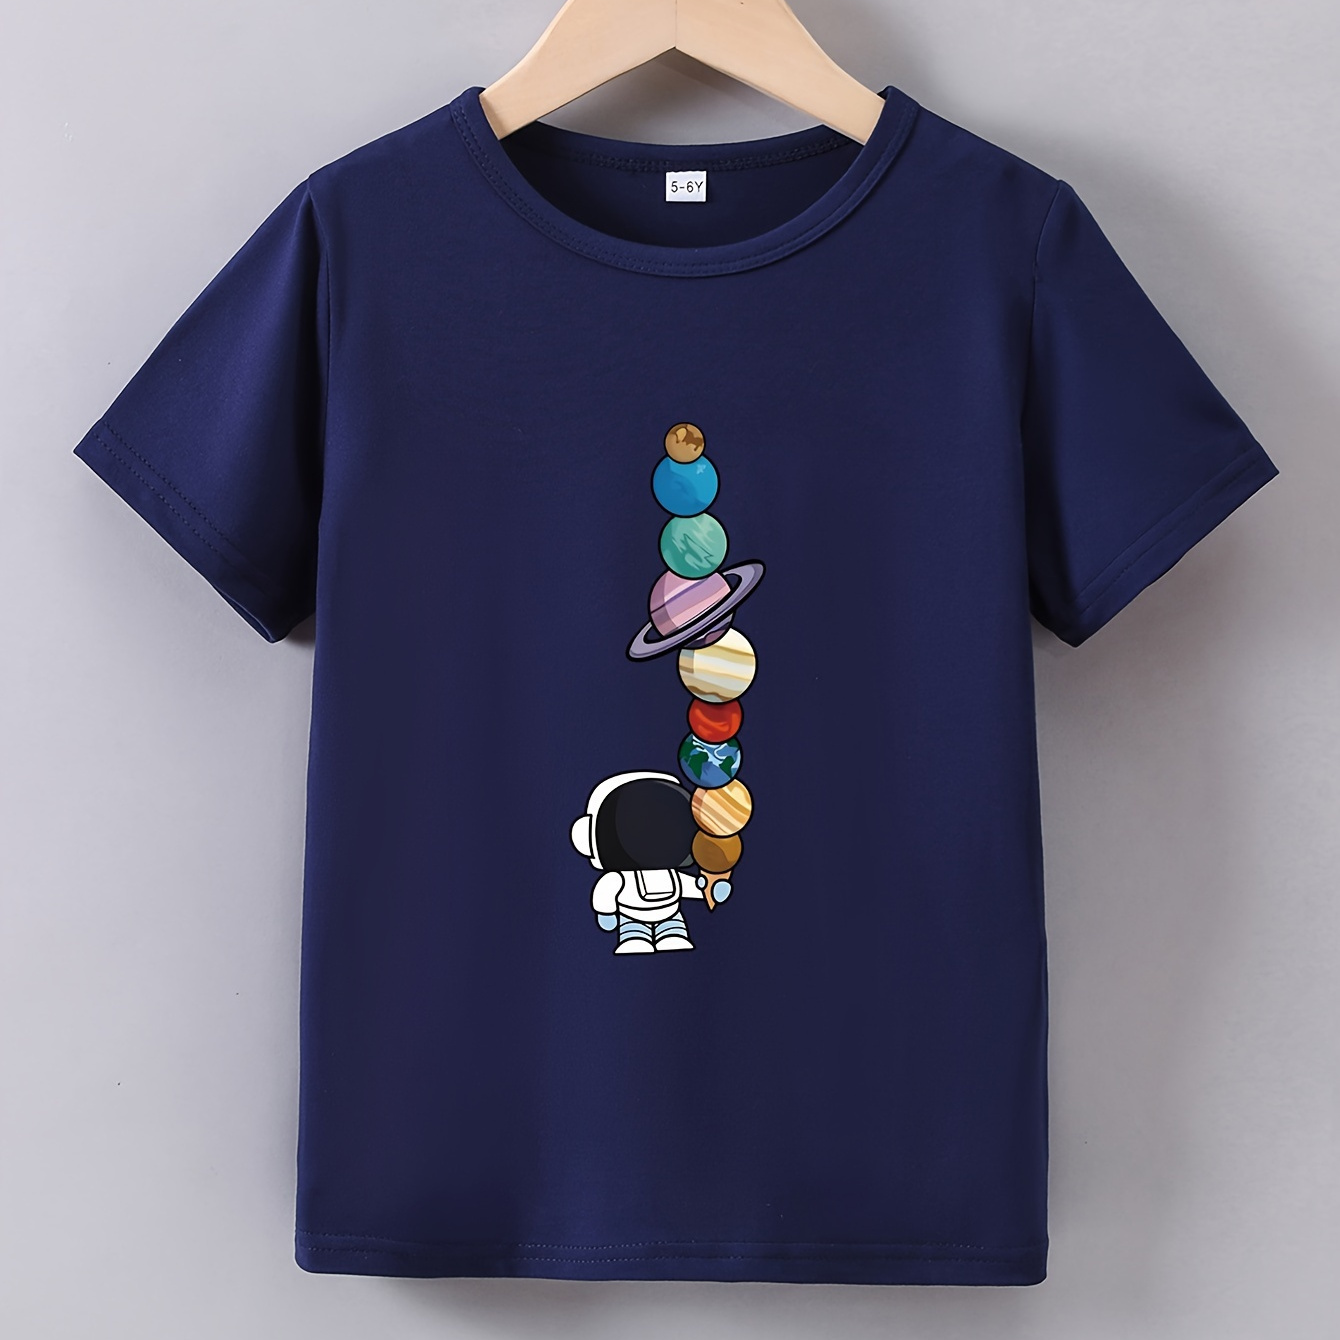 

Casual Trendy Boys' Summer Top - Cartoon Astronaut & Planets Graphic Engaging Short Sleeve Crew Neck T-shirt - Street Outing Tee Gift